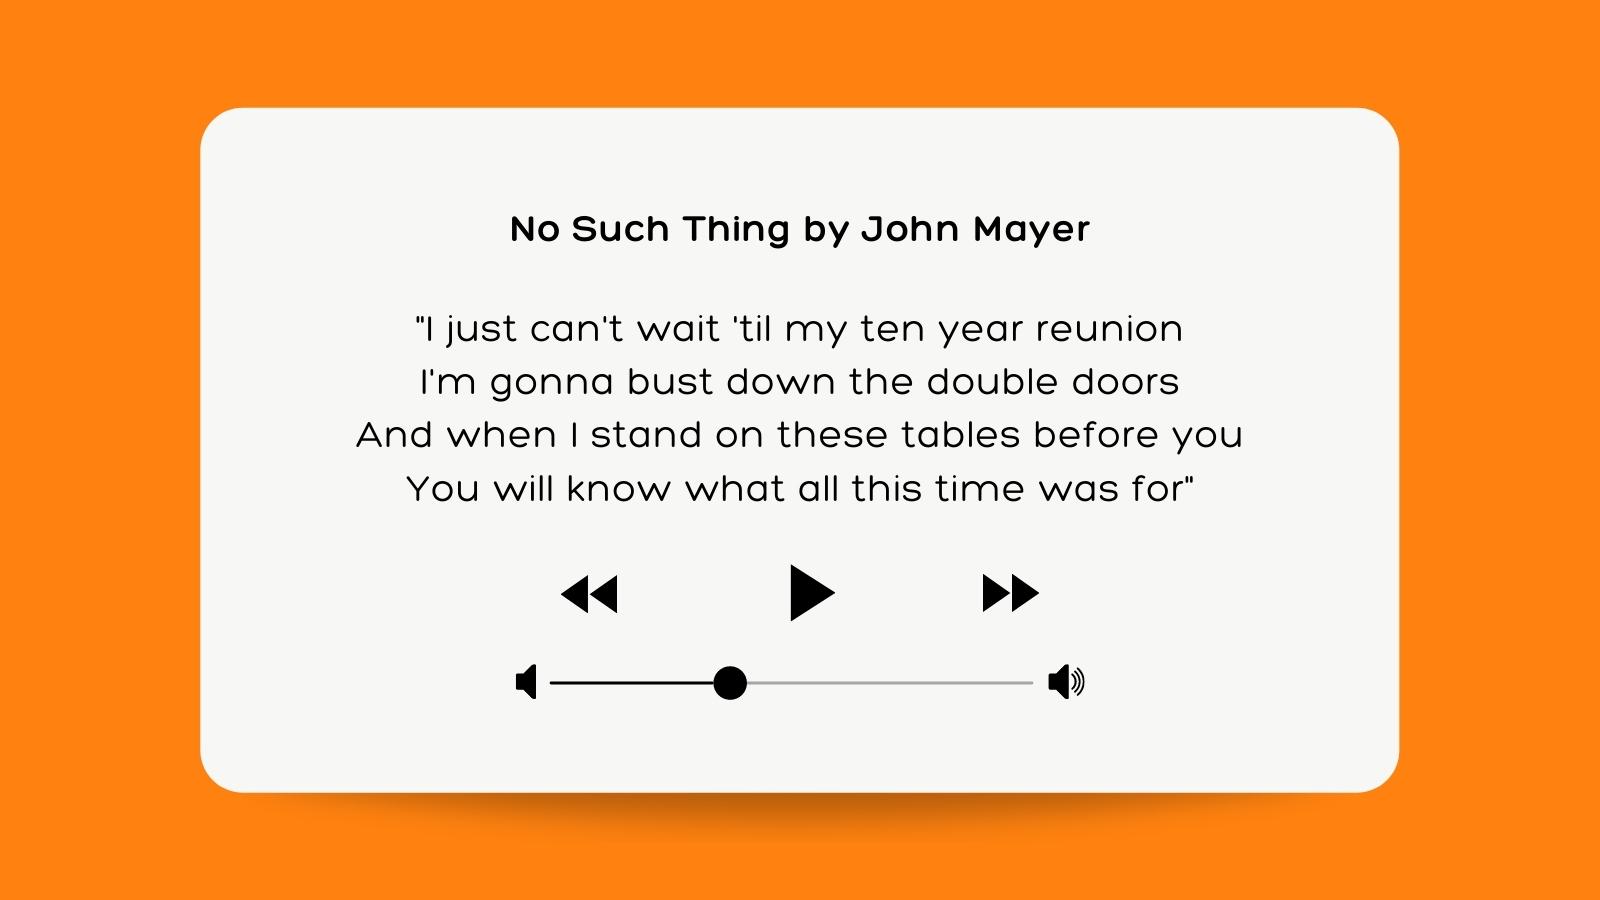 No Such Thing by John Mayer "I just can't wait 'til my ten year reunion I'm gonna bust down the double doors And when I stand on these tables before you You will know what all this time was for"